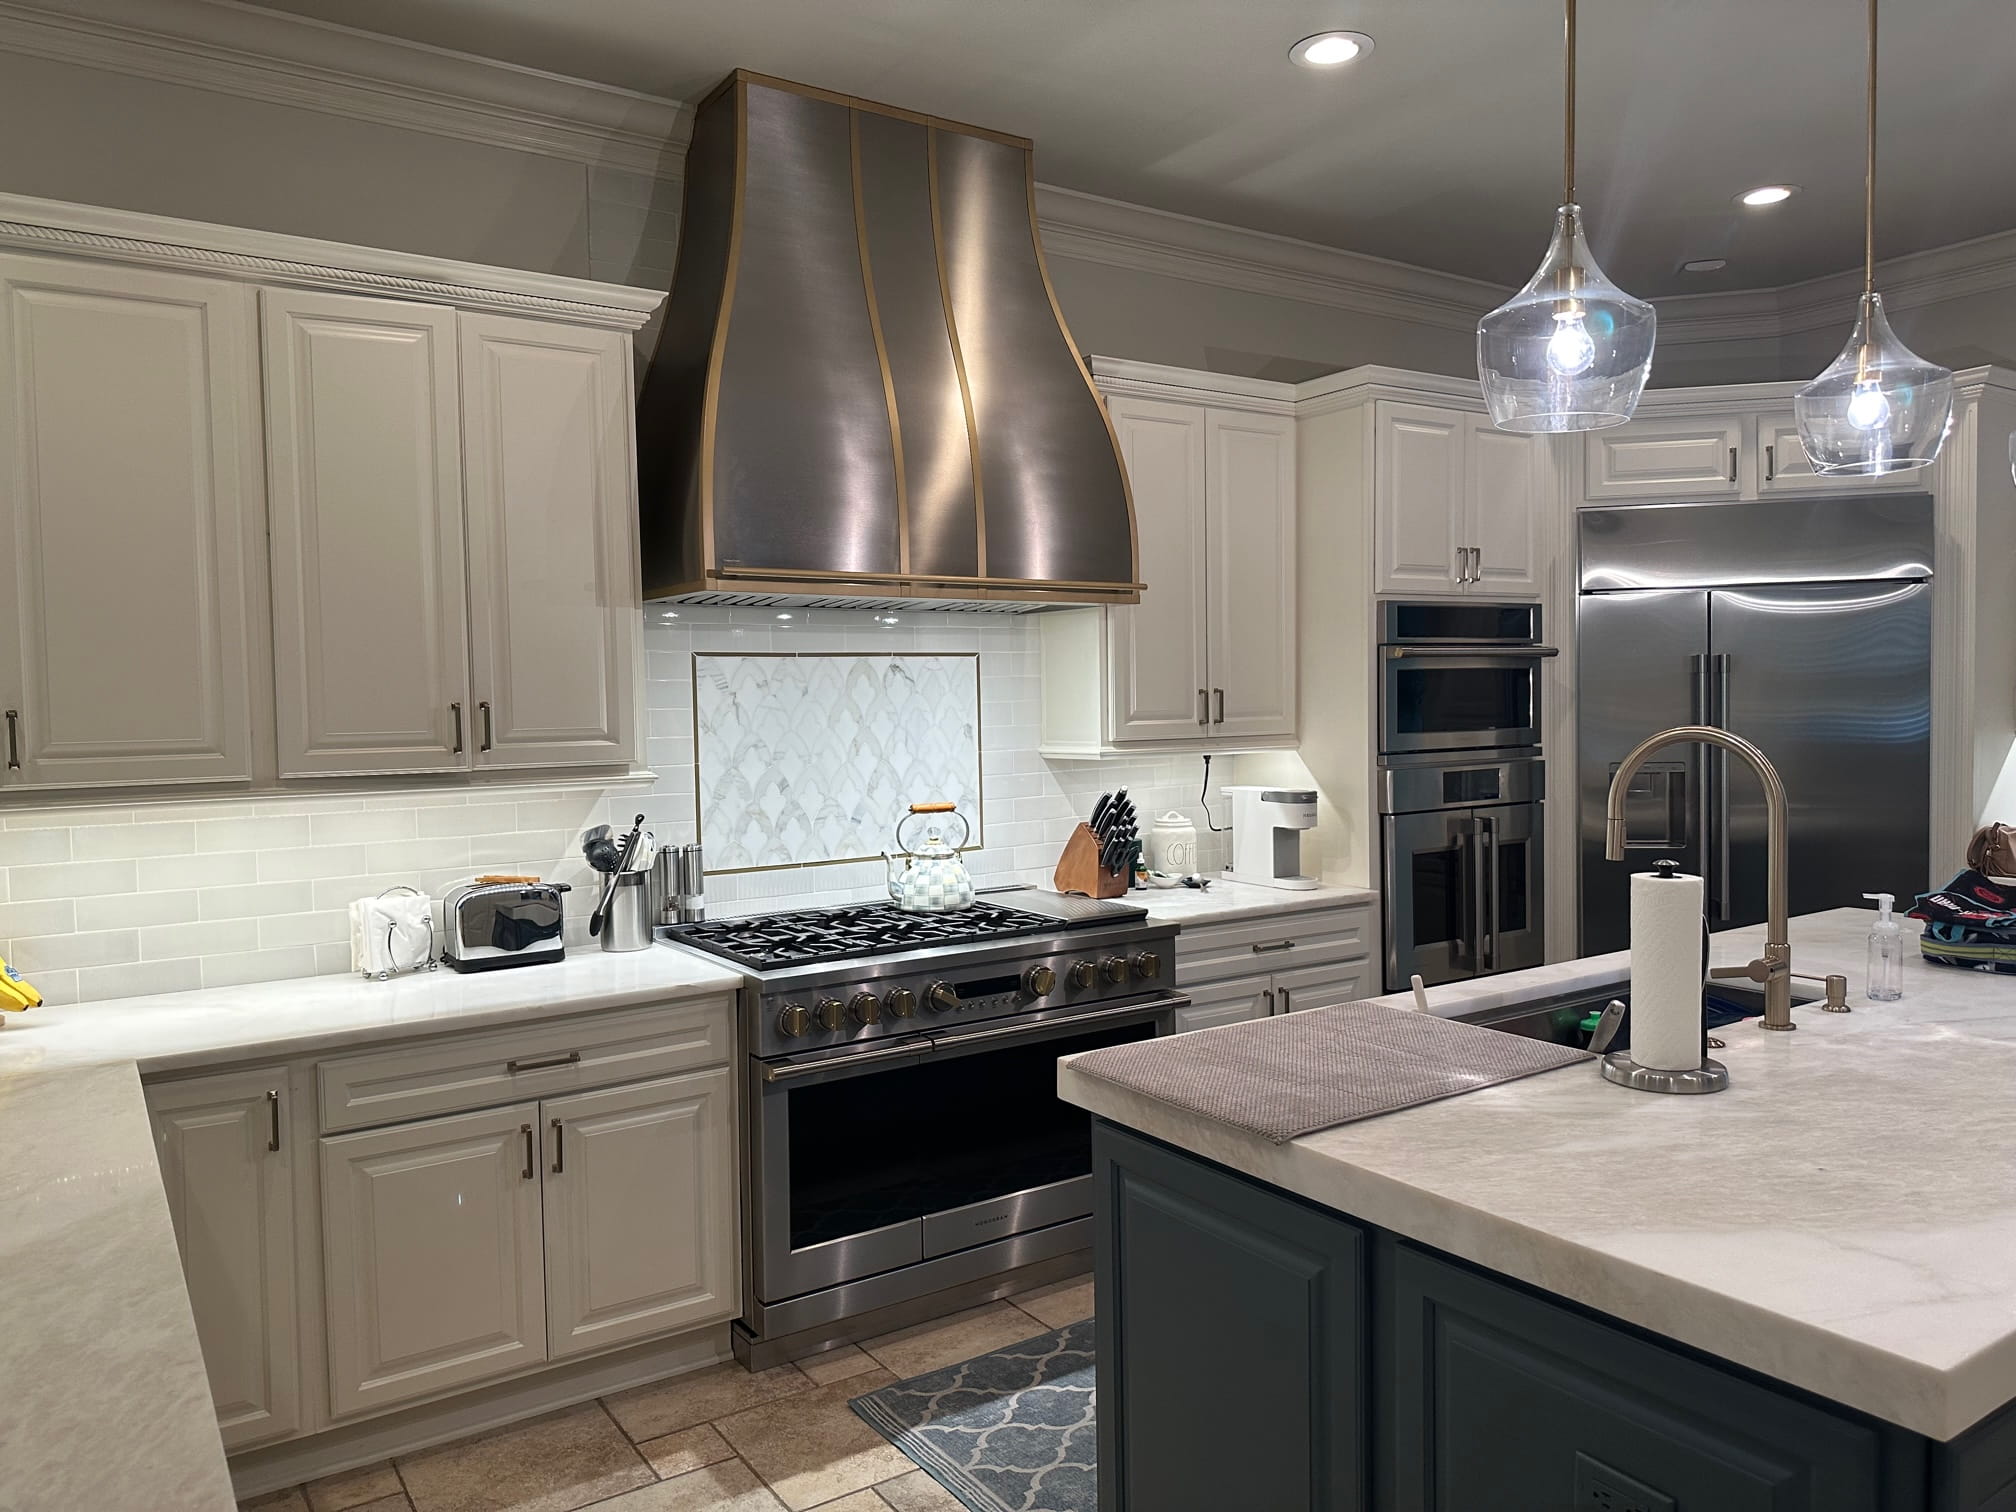 Artistry of french kitchen design, accentuated by pristine white kitchen cabinets and elegant white kitchen countertops, and mesmerizing marble backsplash